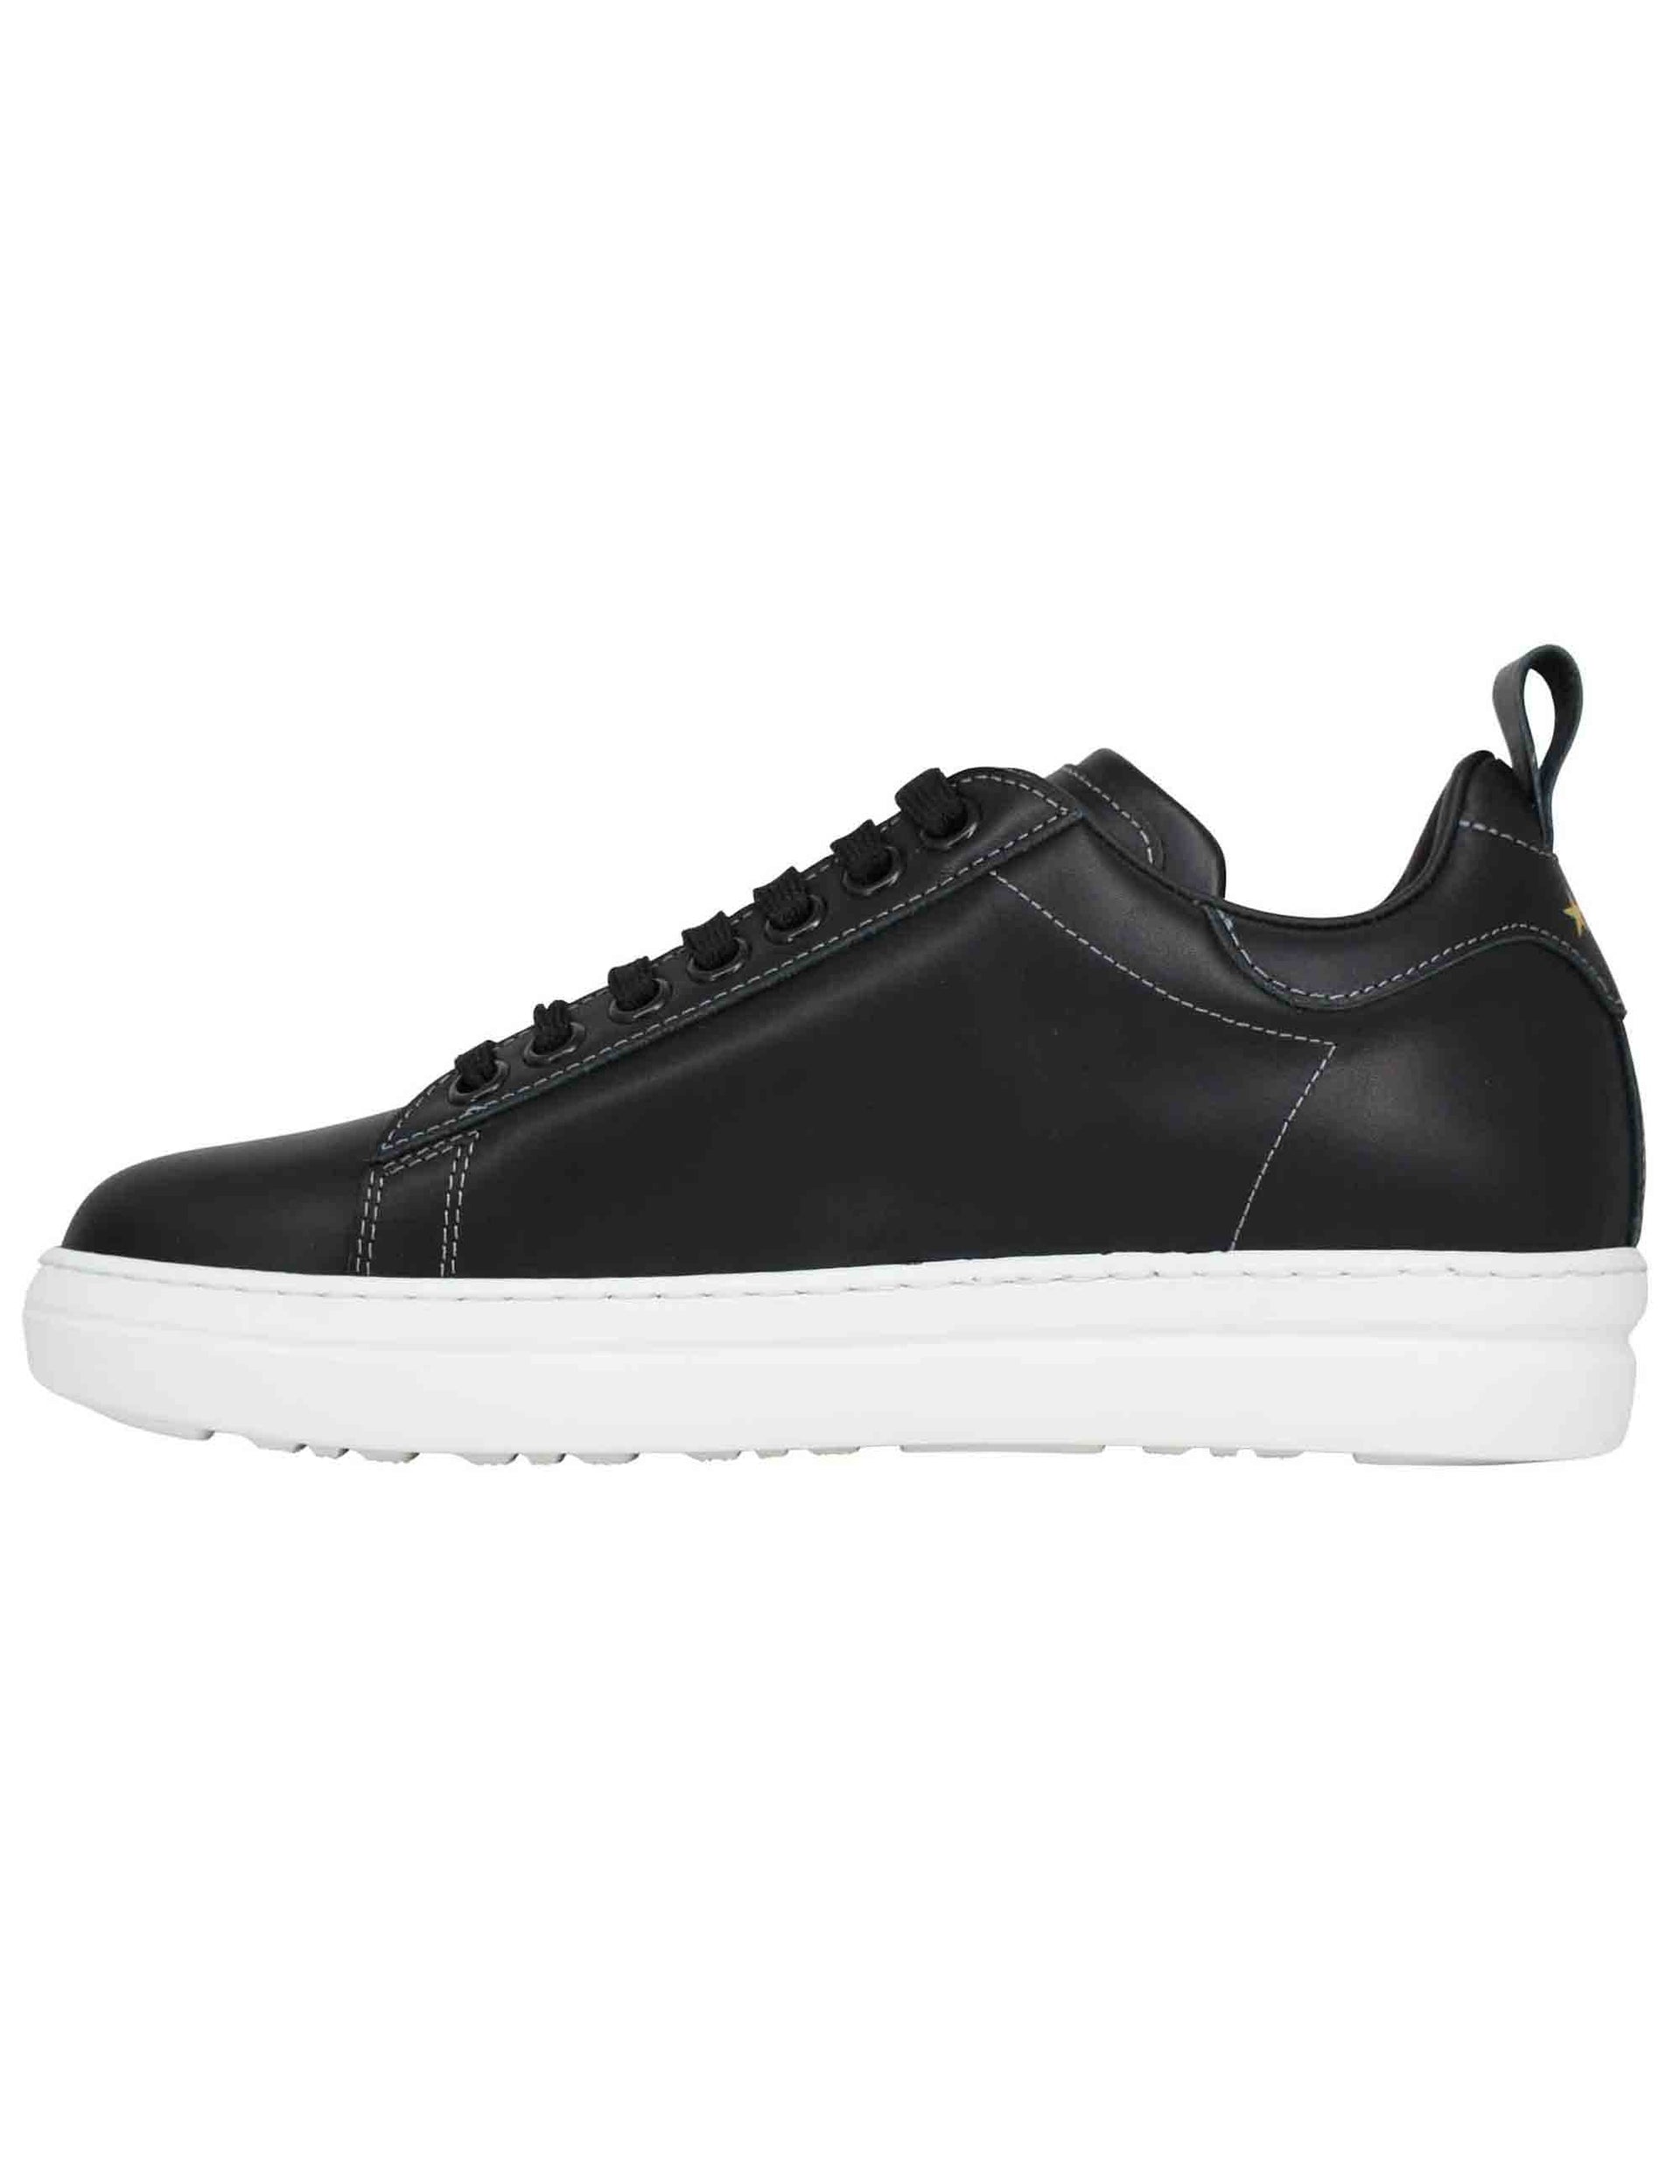 Court classic men's sneakers in black leather